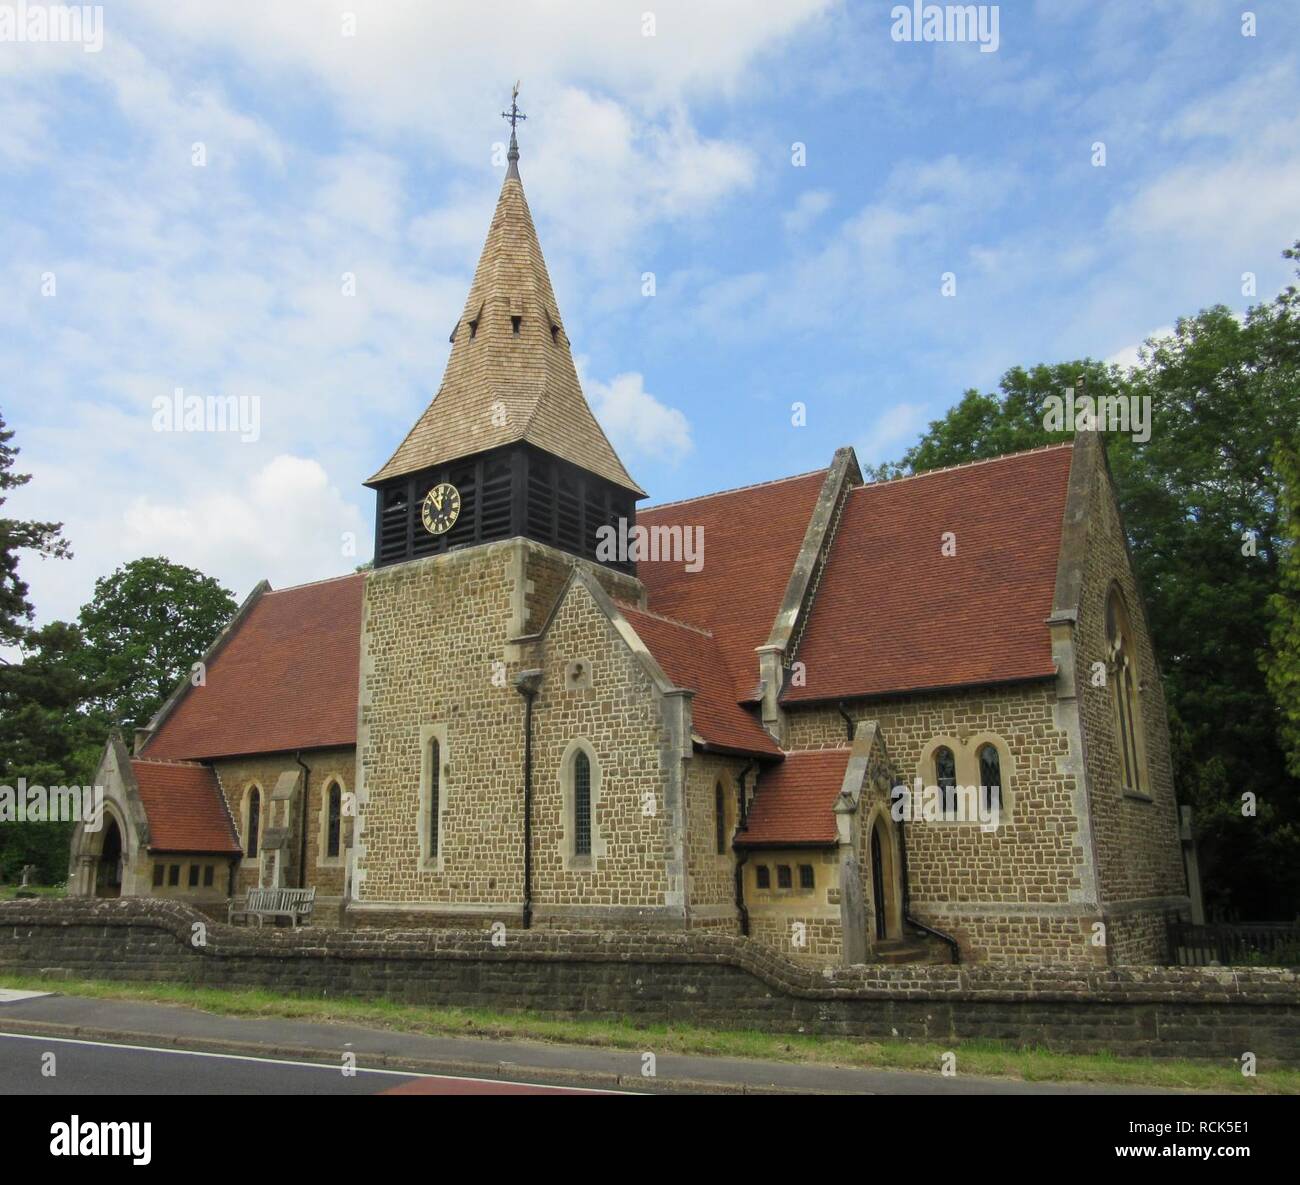 All Saints Church, Grayswood Road, Grayswood (June 2015) (8). Stock Photo